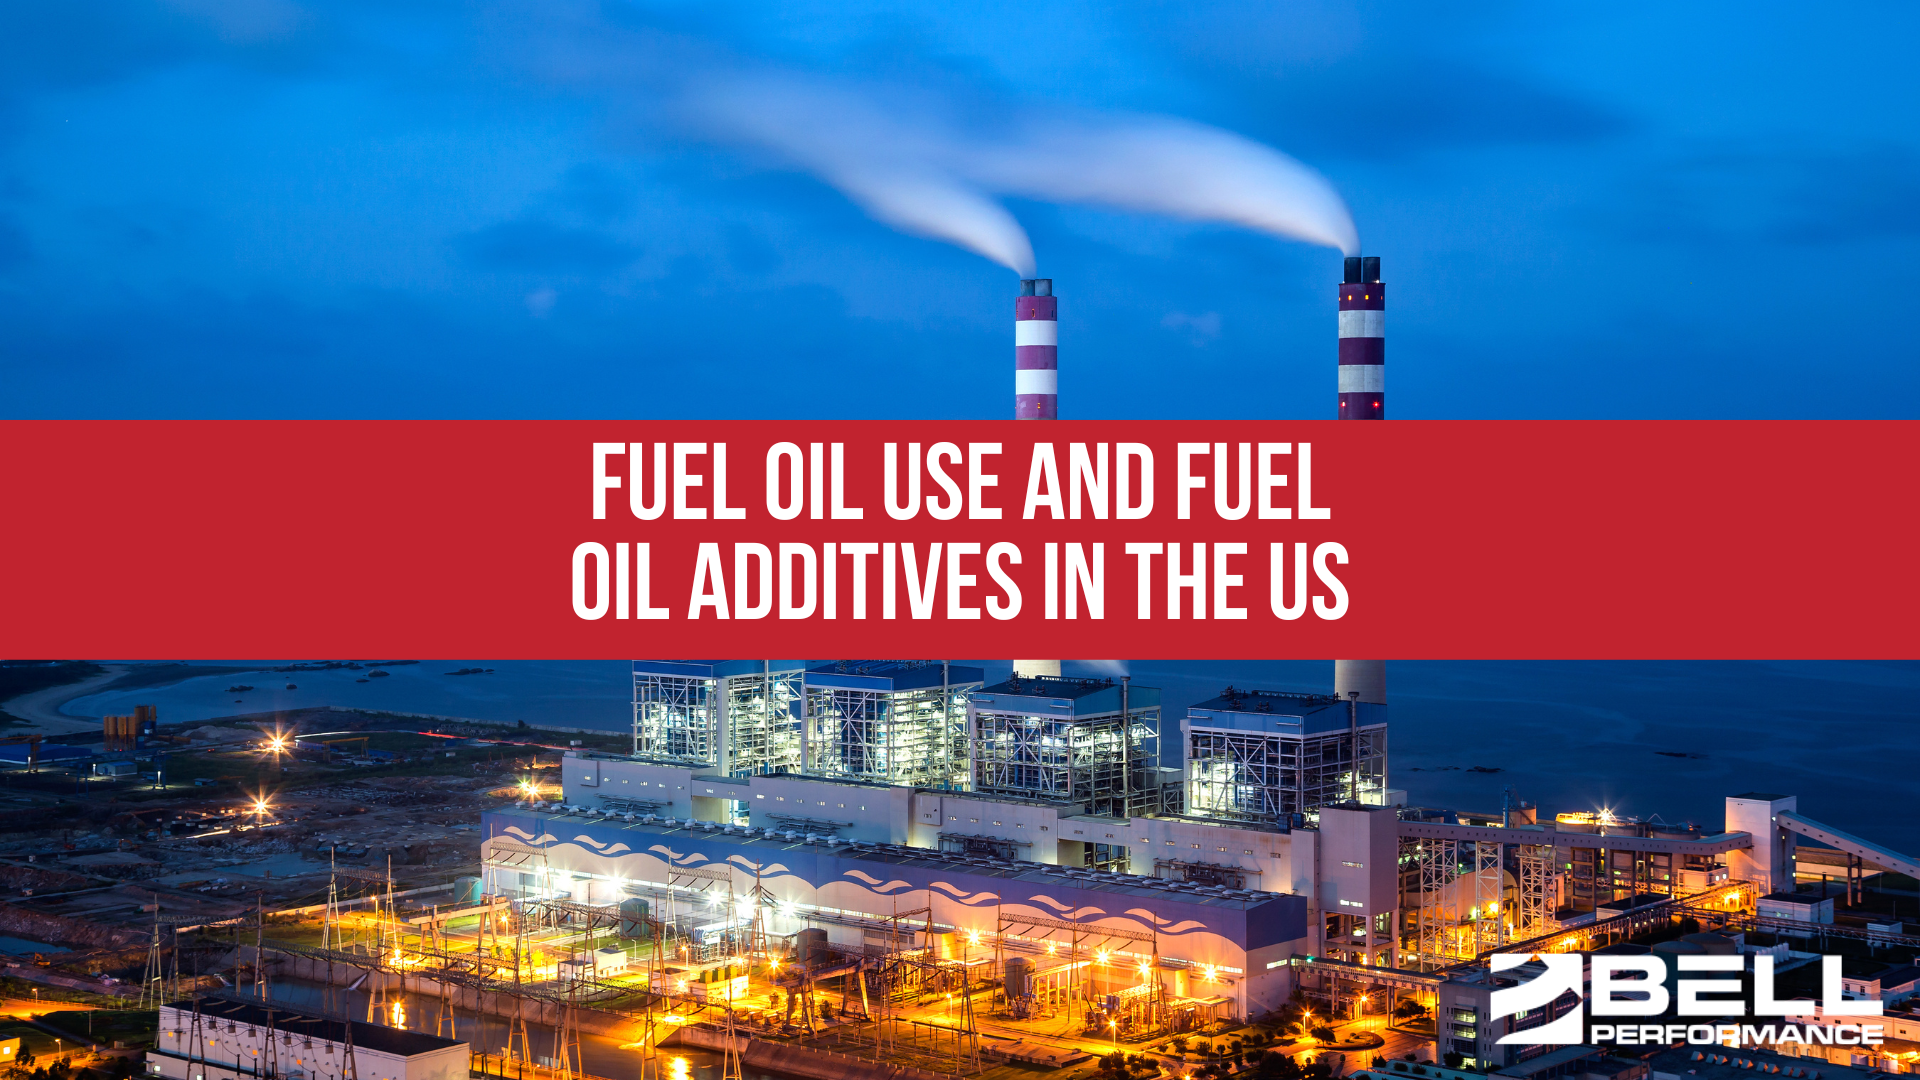 Fuel Oil Use and Fuel Oil Additives in the US